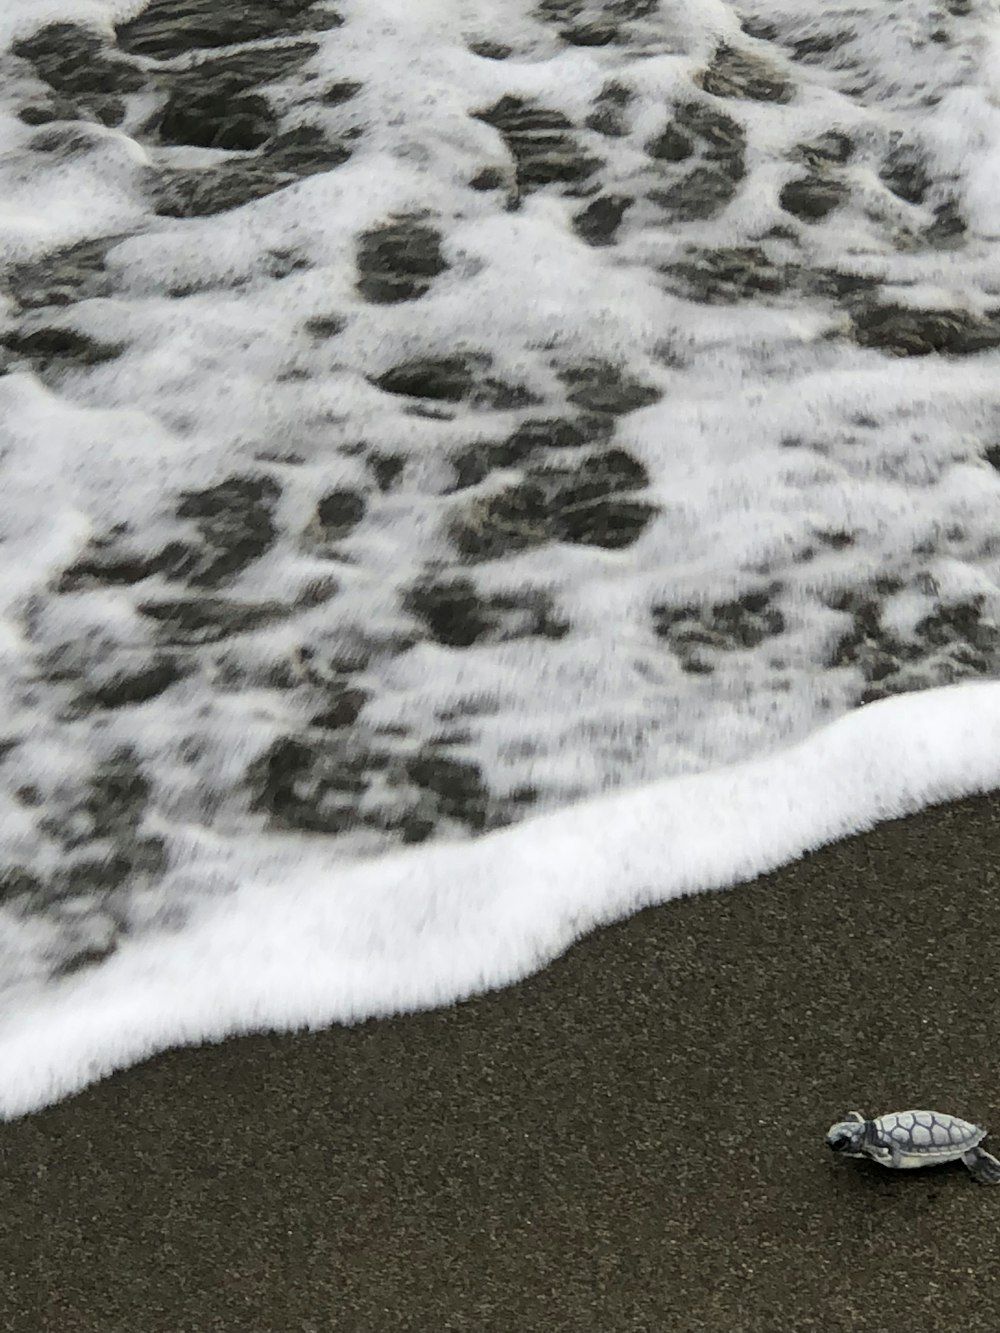 water waves on gray sand